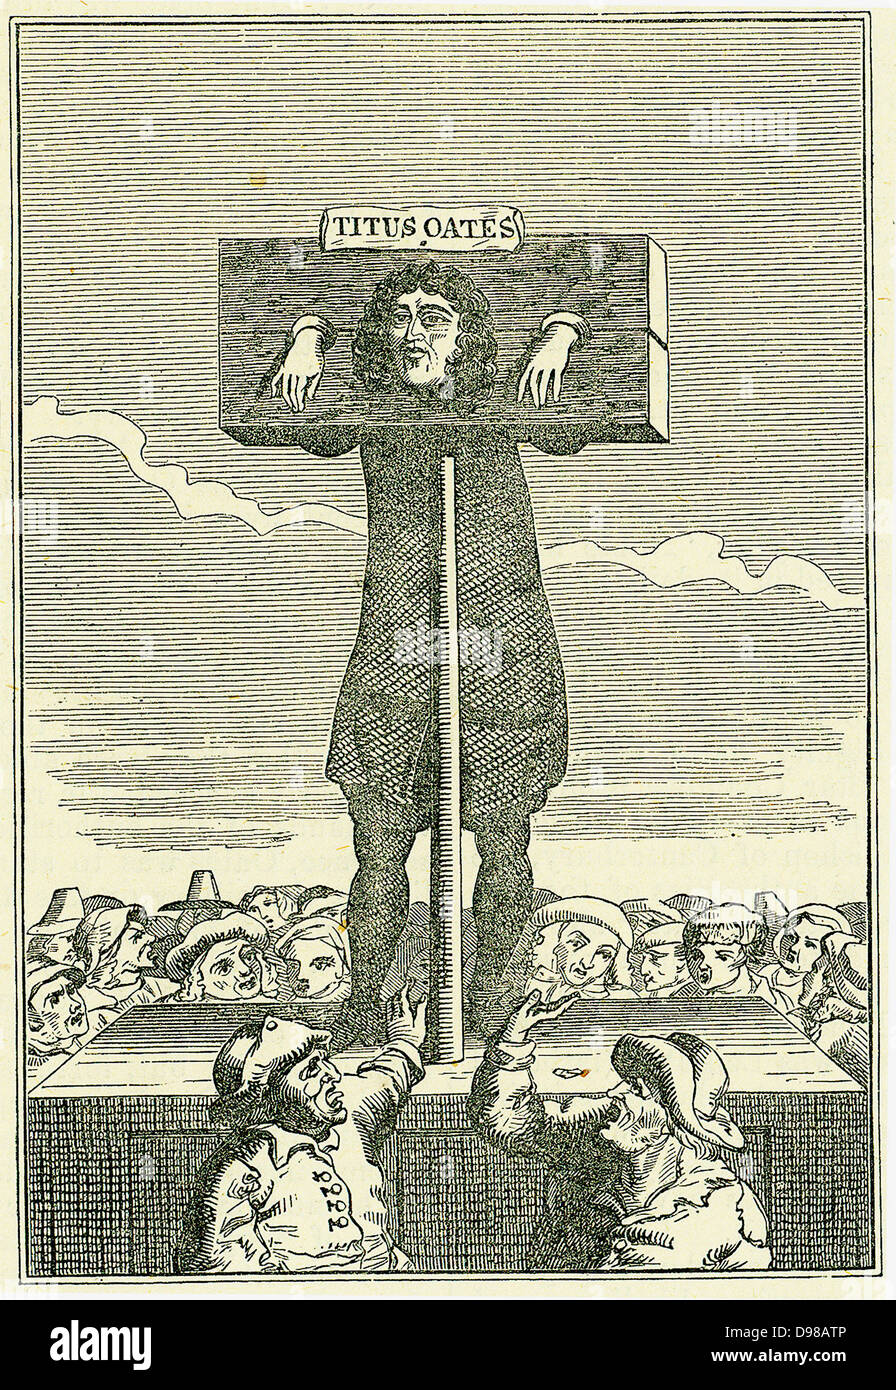 Titus Oates (1649-1705) in the pillory as a punishment for perjury (1685). Oates was the inventor of the Popish Plot, a supposed Roman Catholic conspiracy to kill Charles II. On his false evidence up to 15 people were executed and many other imprisoned under suspicion. Engraving. Stock Photo